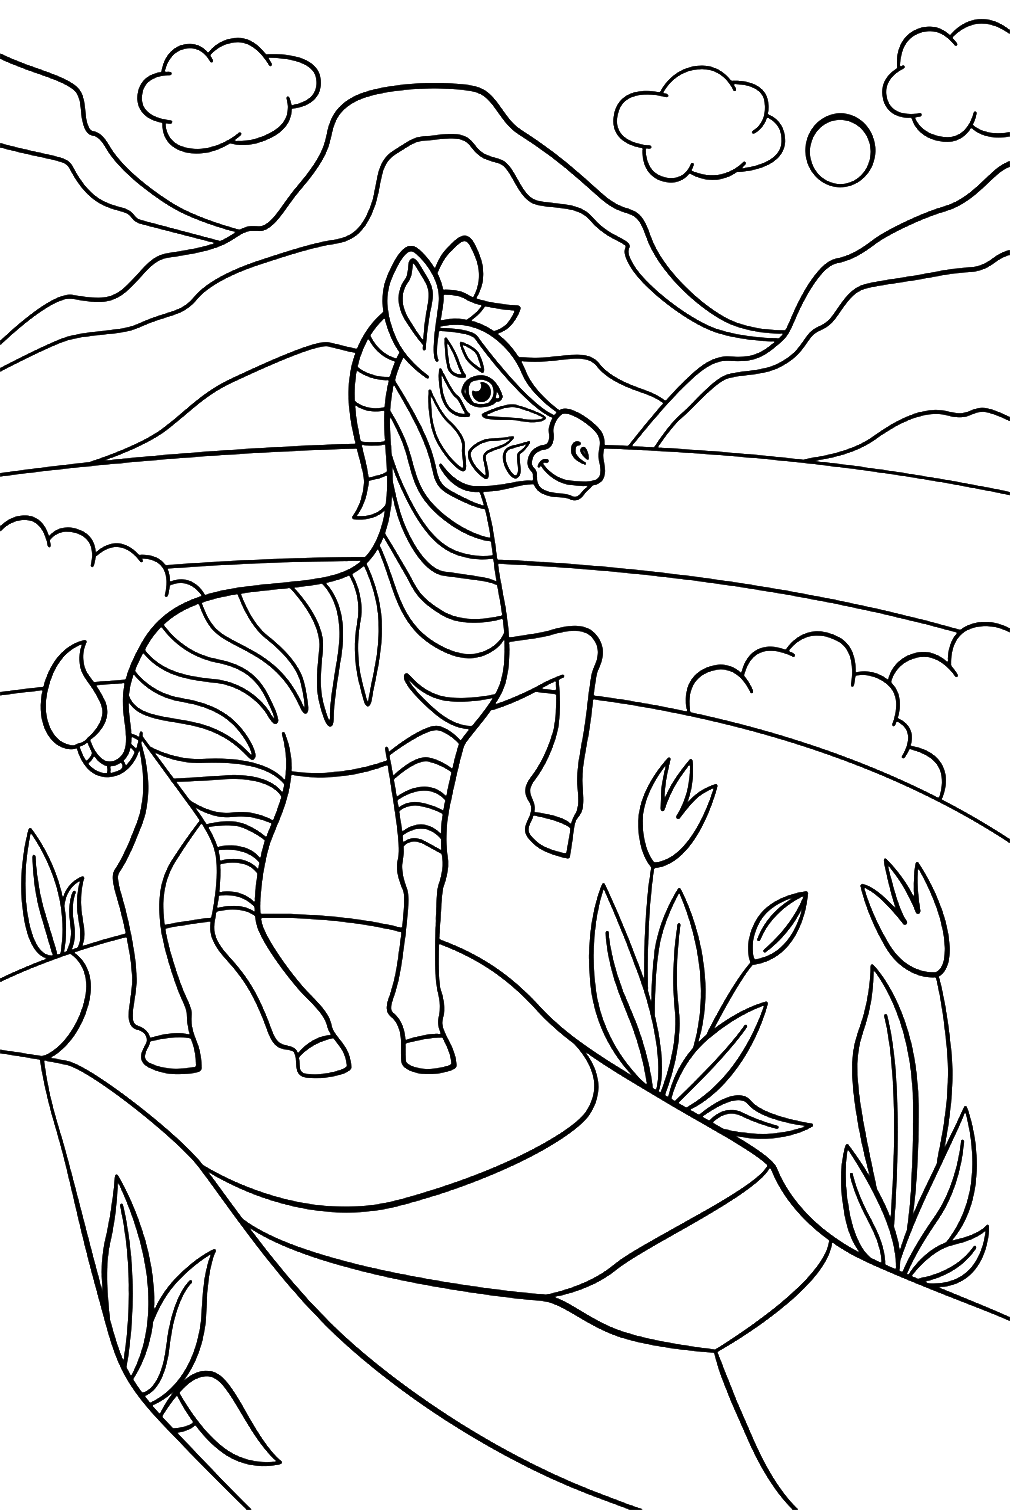 Zebra Coloring Pictures To Print